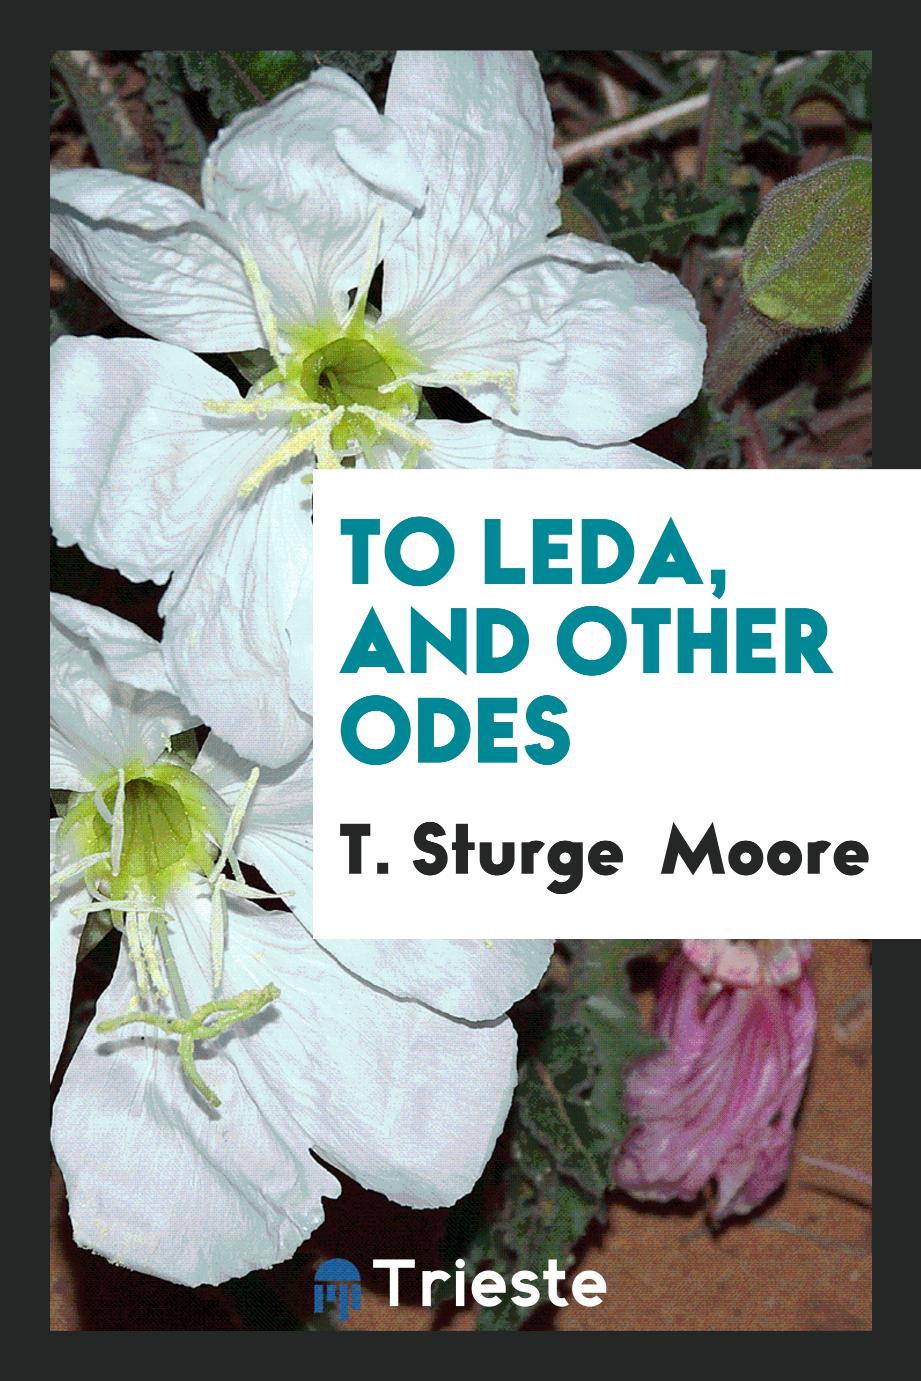 To Leda, and Other Odes